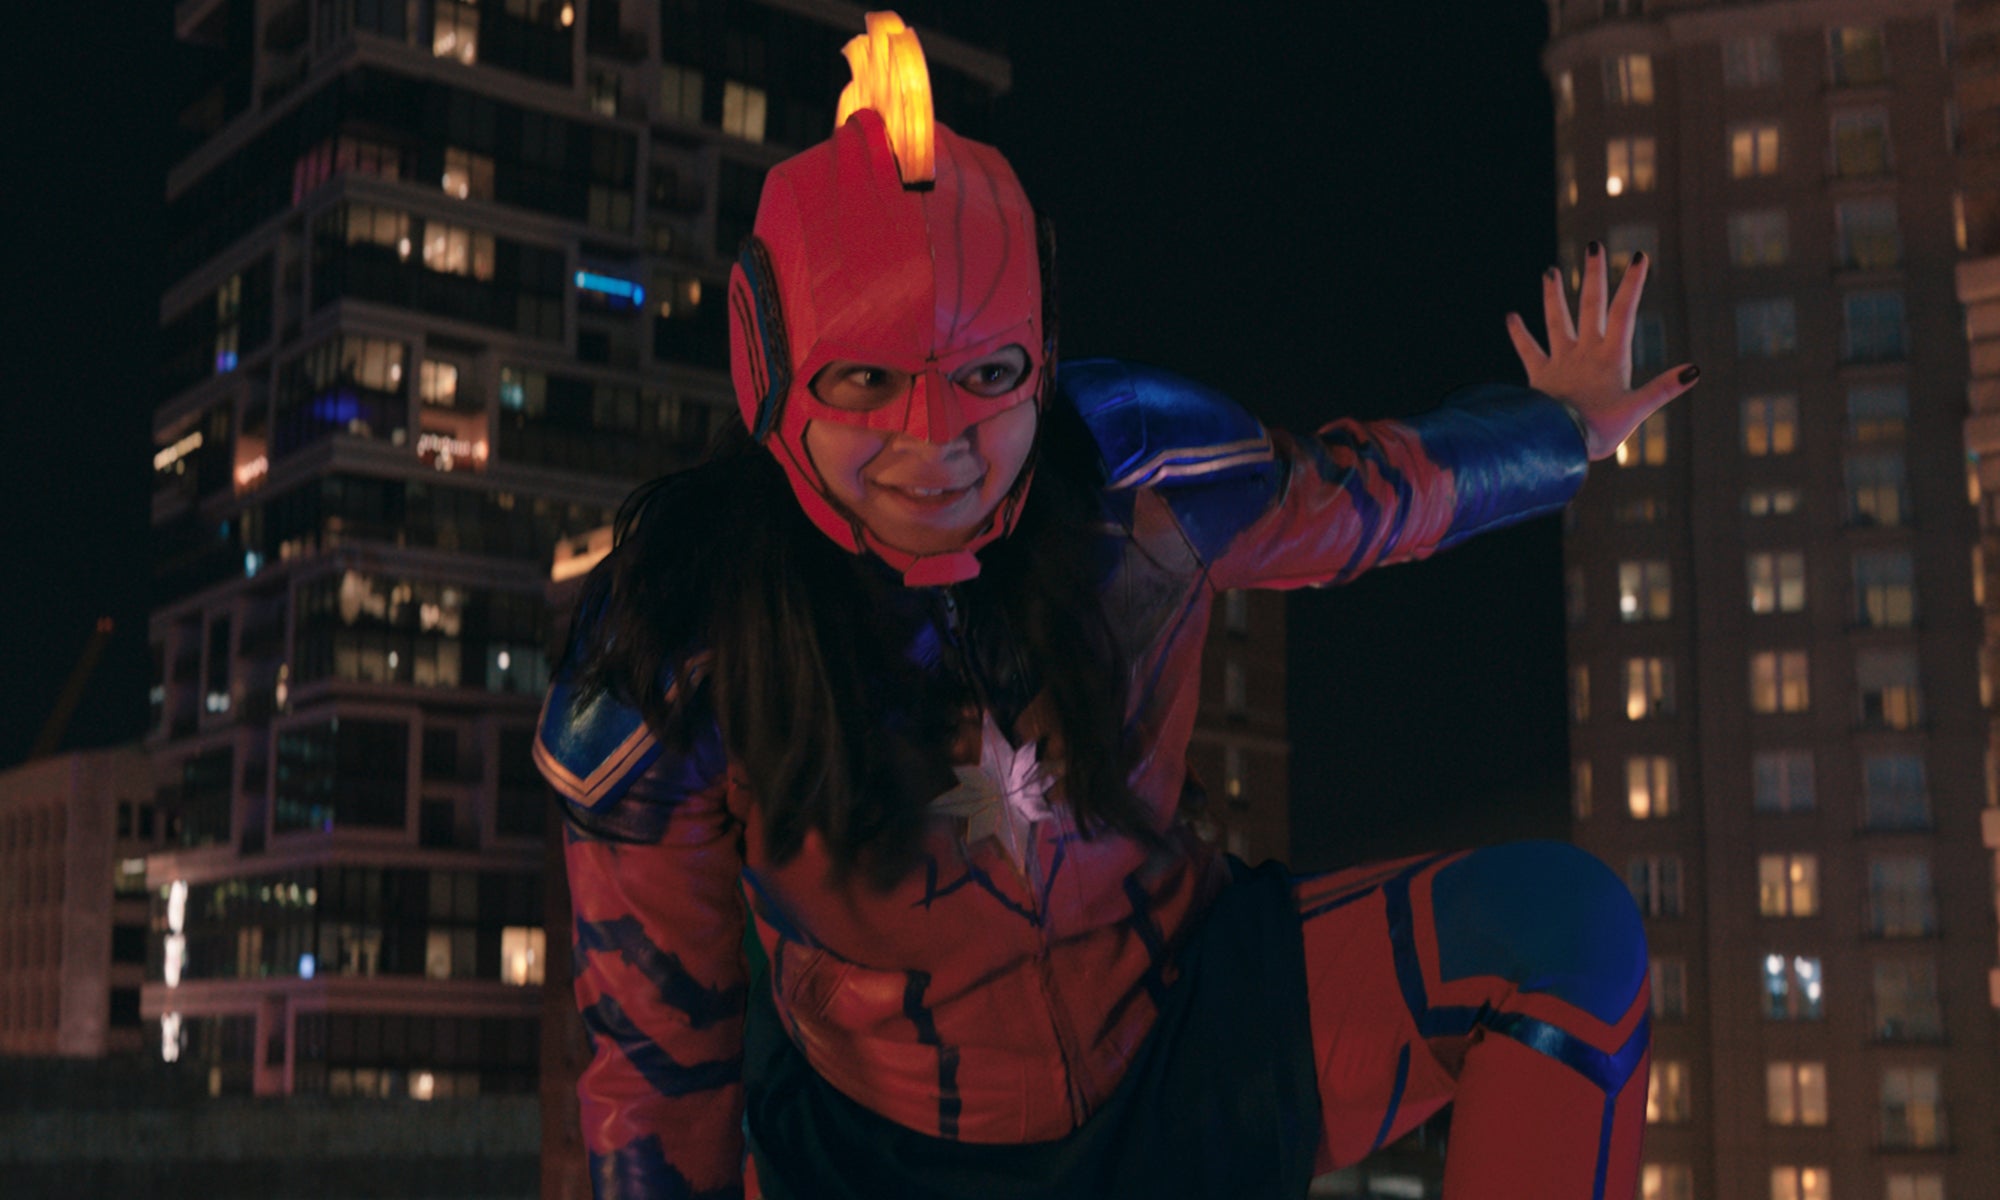 A young woman (Kamala Khan) on a rooftop in costume as Captain Marvel